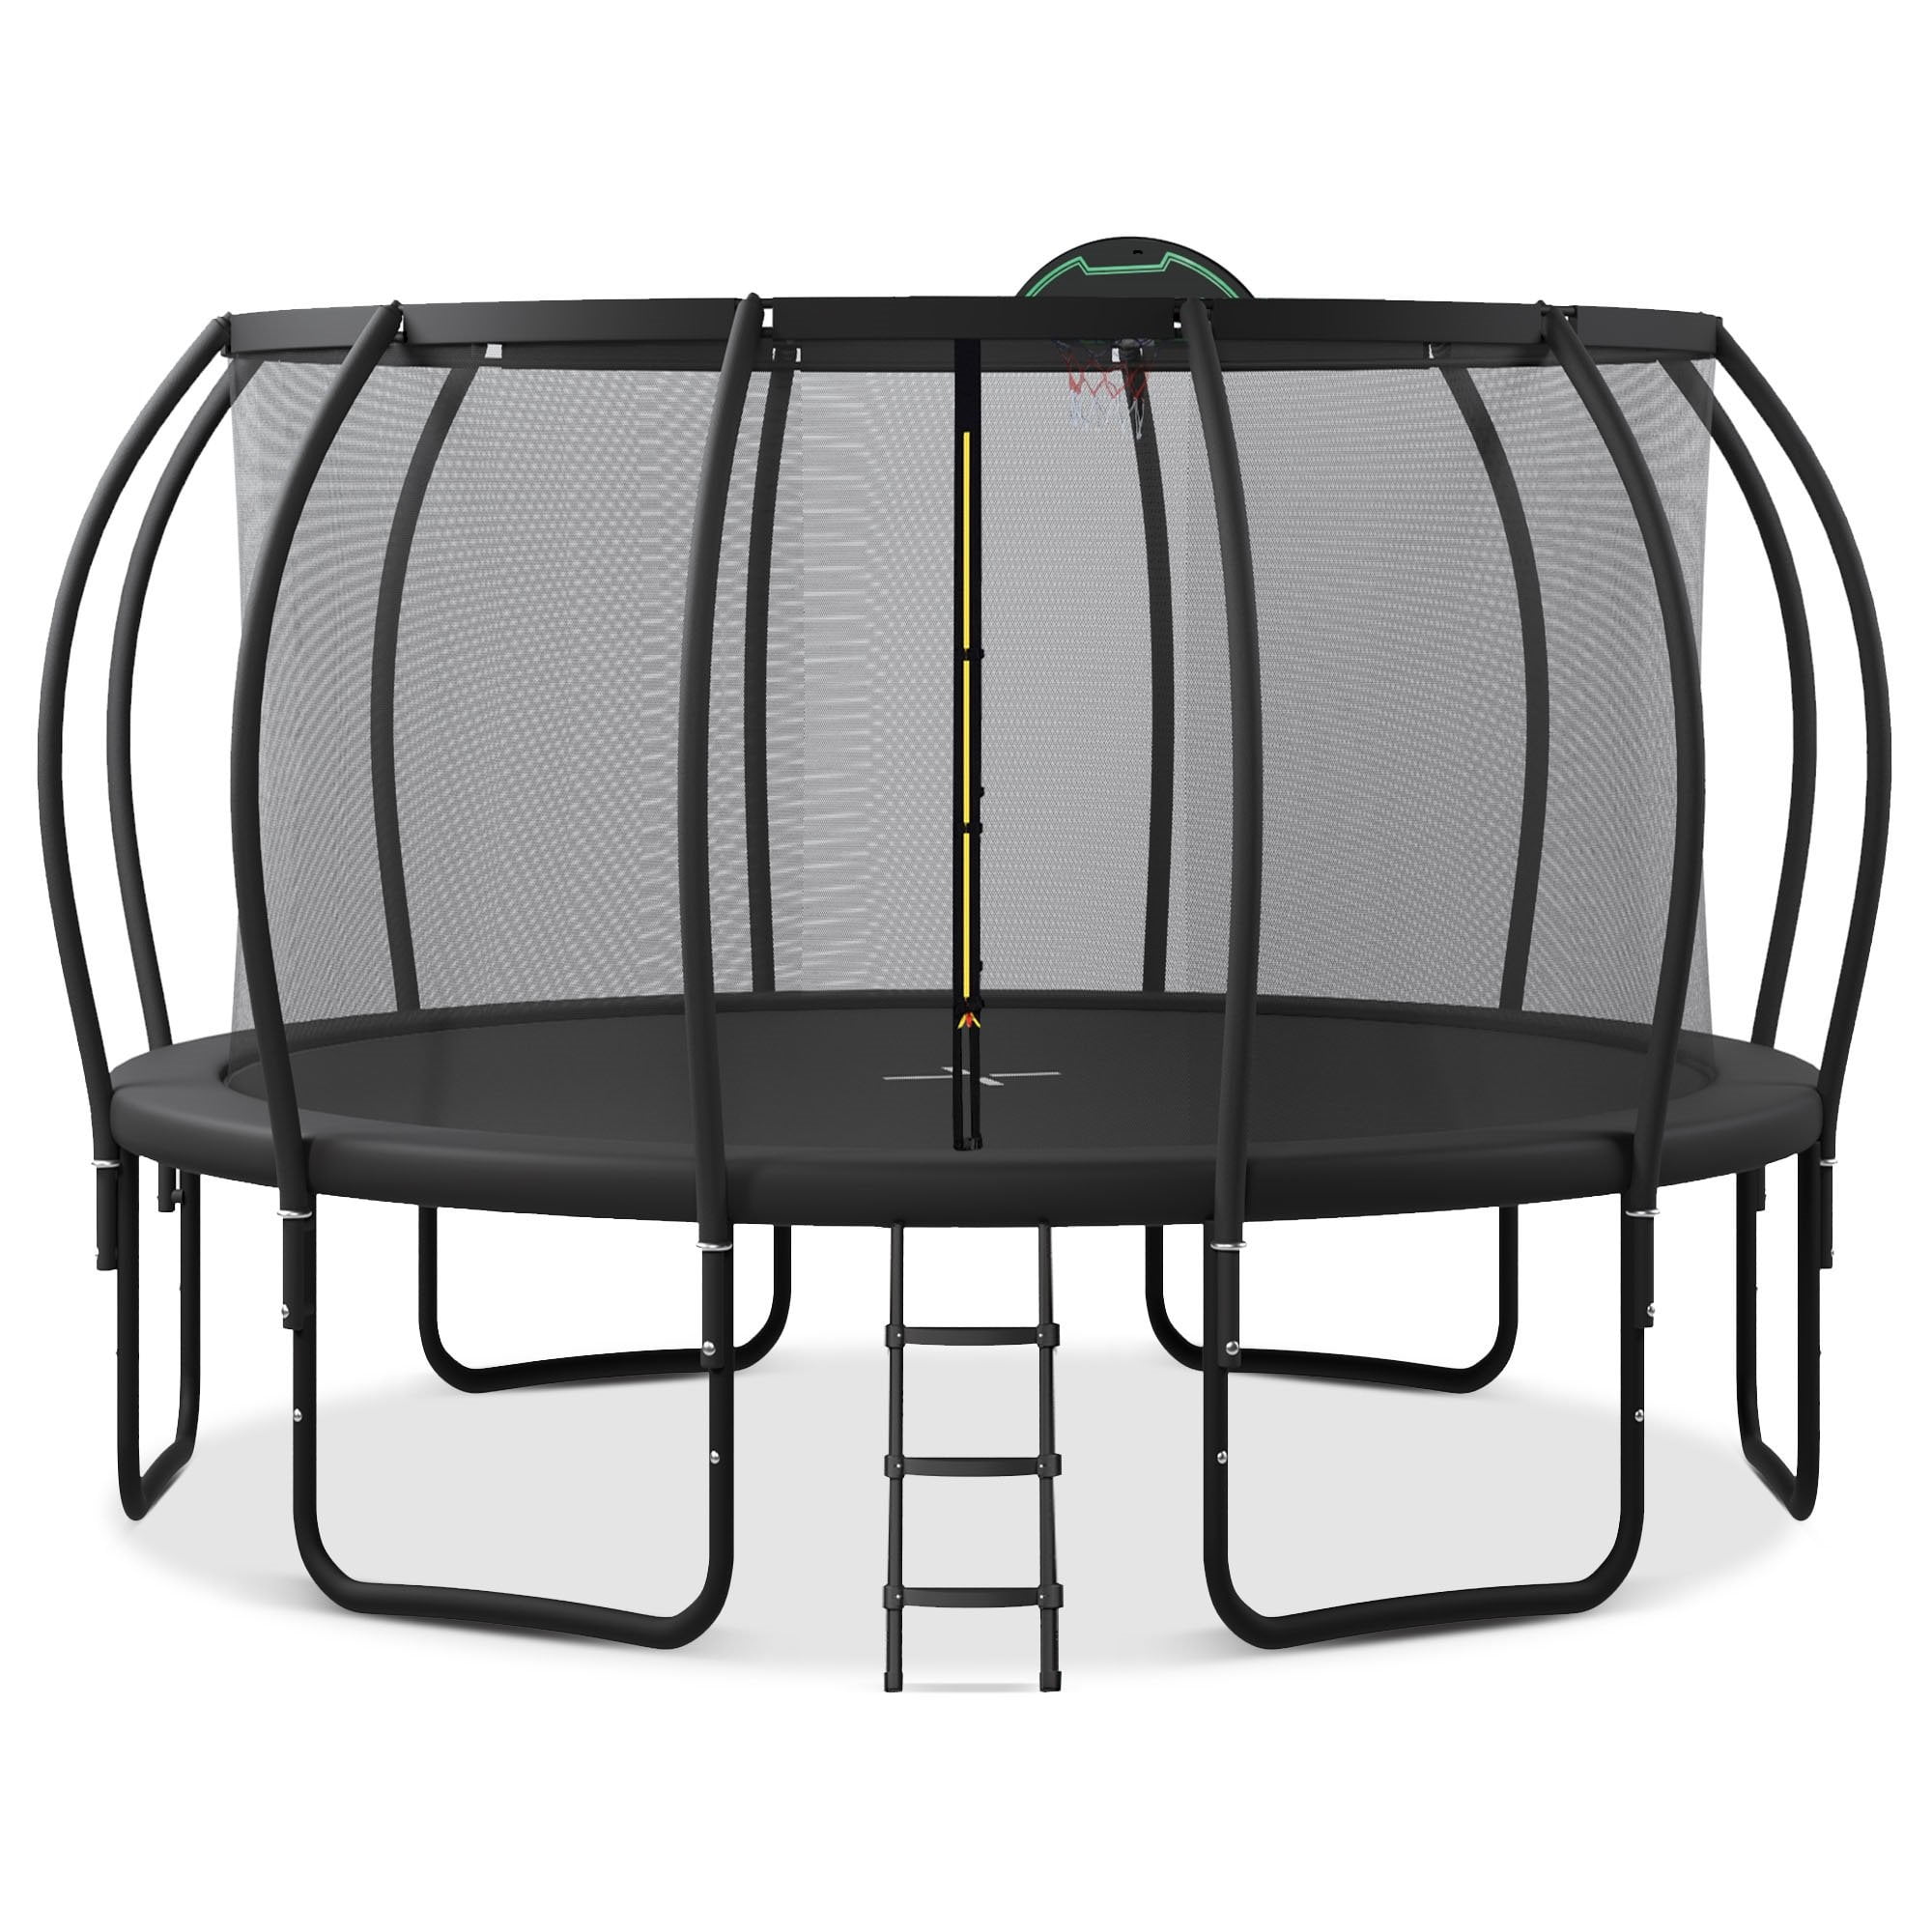 Jump Into Fun Trampoline 15FT, 1500LBS Trampoline for 3-4 Adults or 7-8 ...